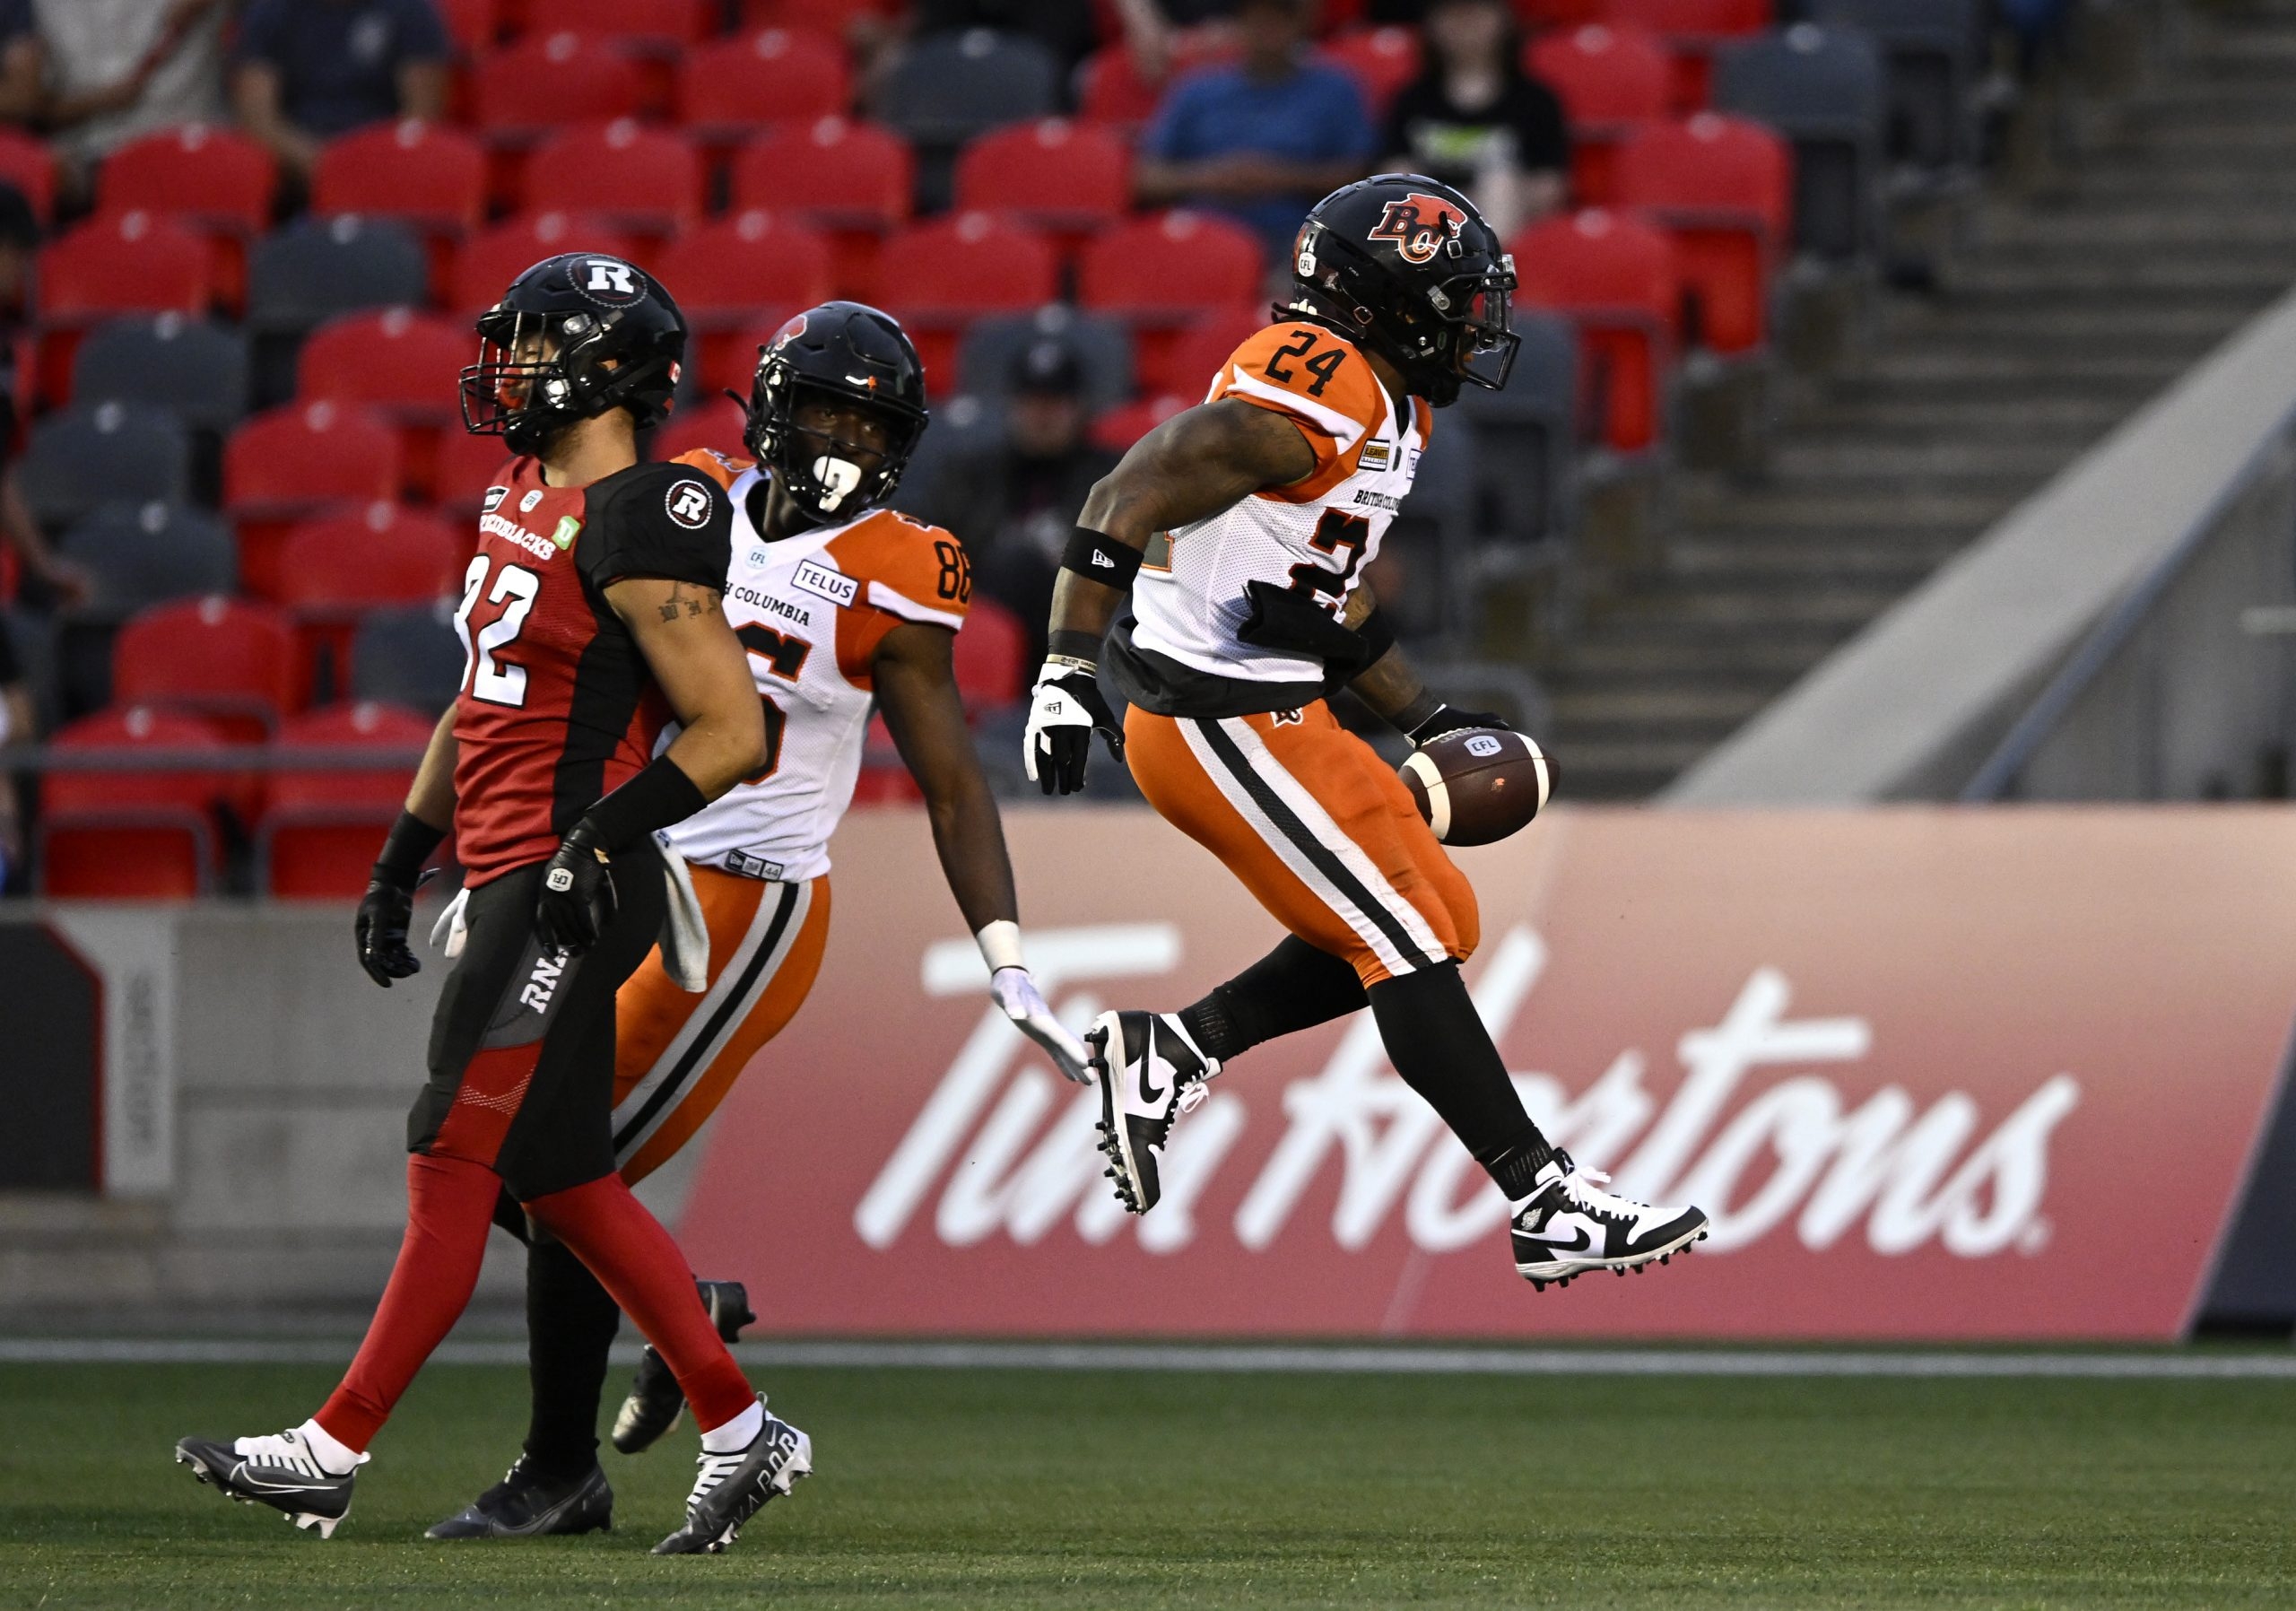 BEAT THE EAST: Ottawa Redblacks have time to sort it out and start winning games